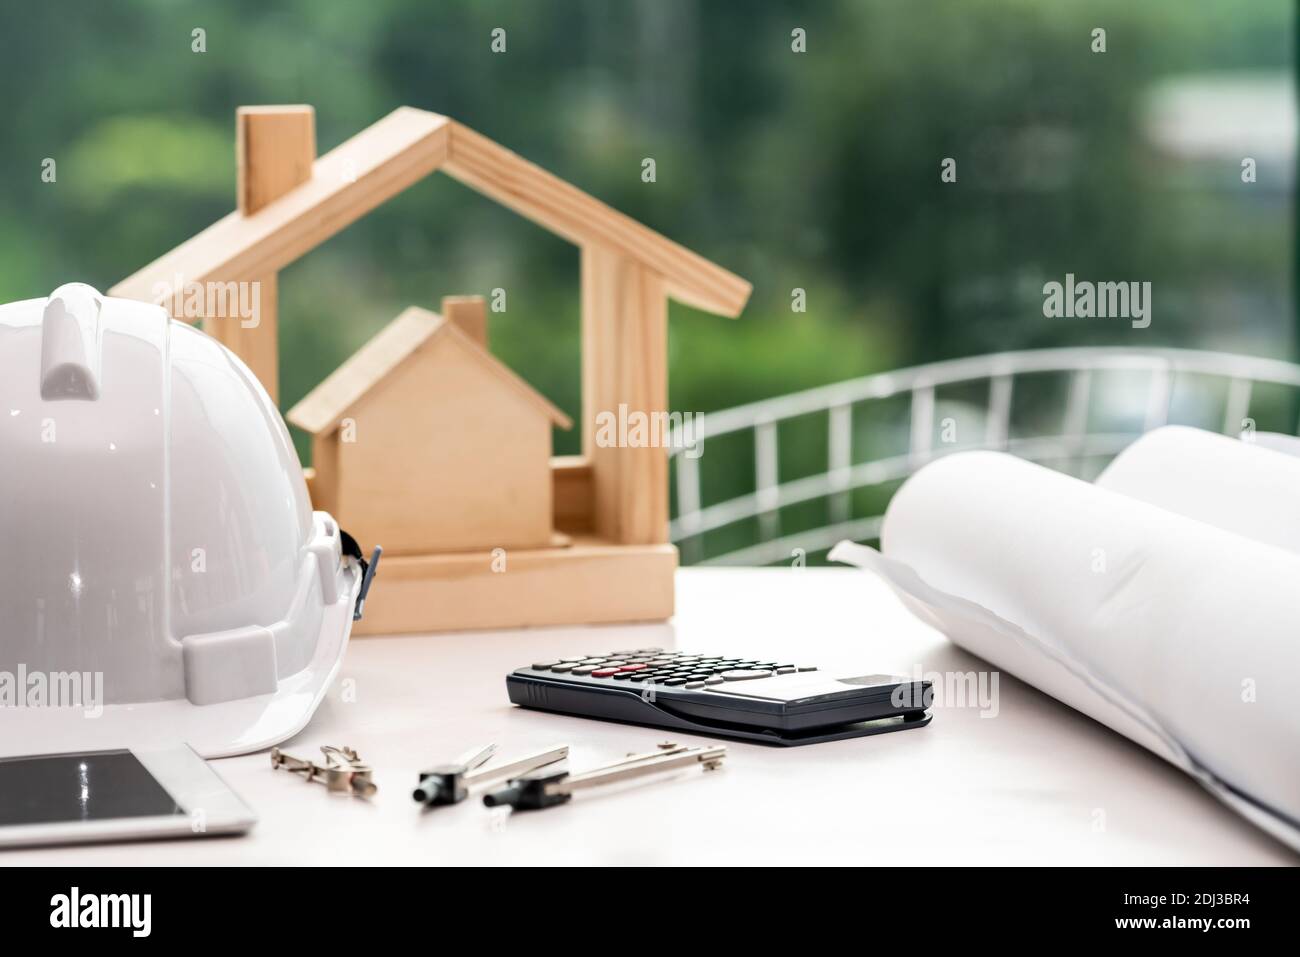 Workspace of architect and engineer. Build construction measurement objects laying on desk in workplace. Engineering concept. Stock Photo